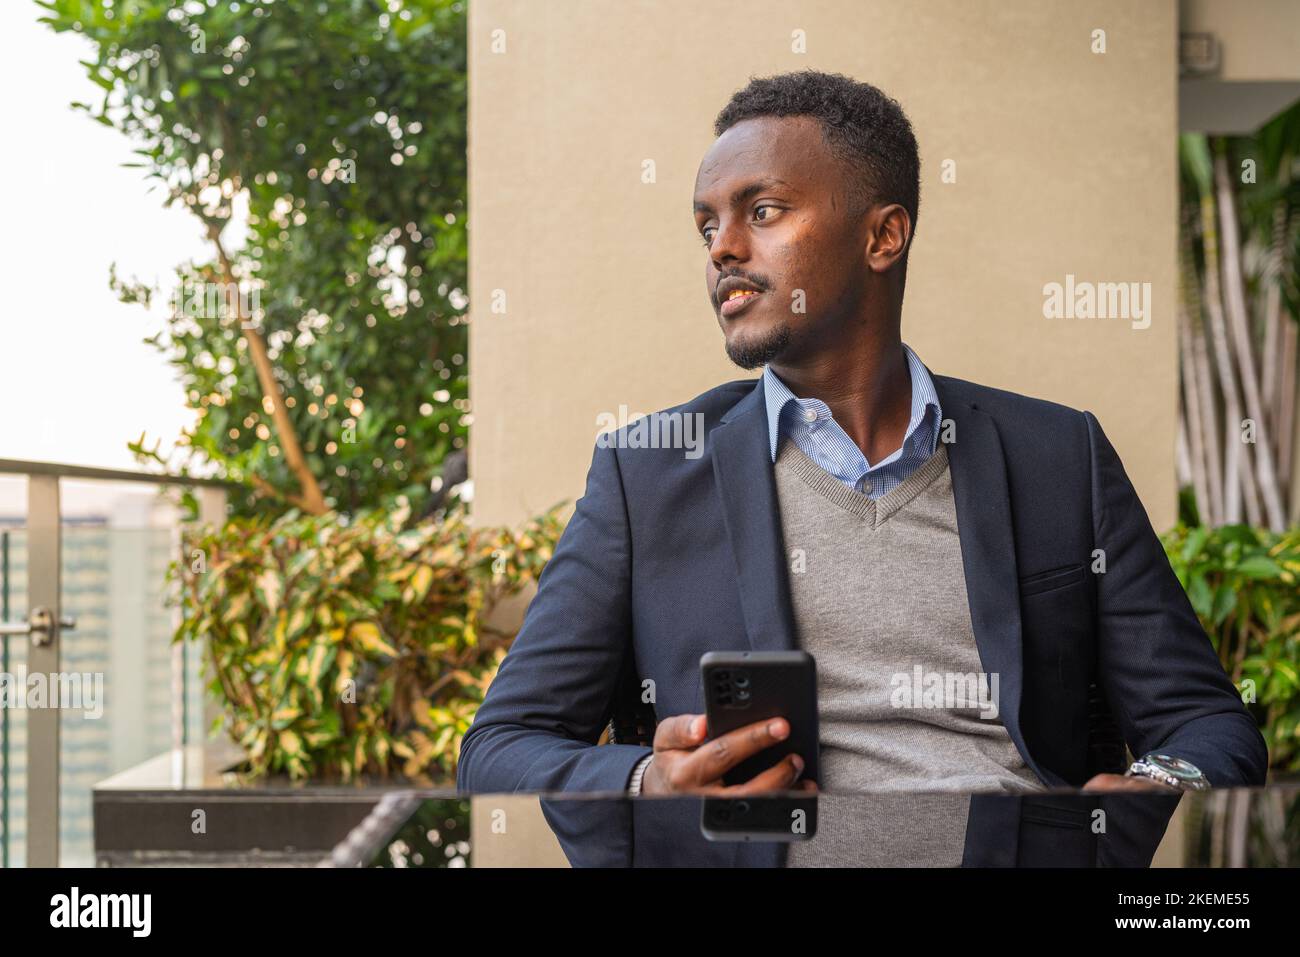 Portrait of handsome black African businessman wearing suit while thinking and using phone Stock Photo